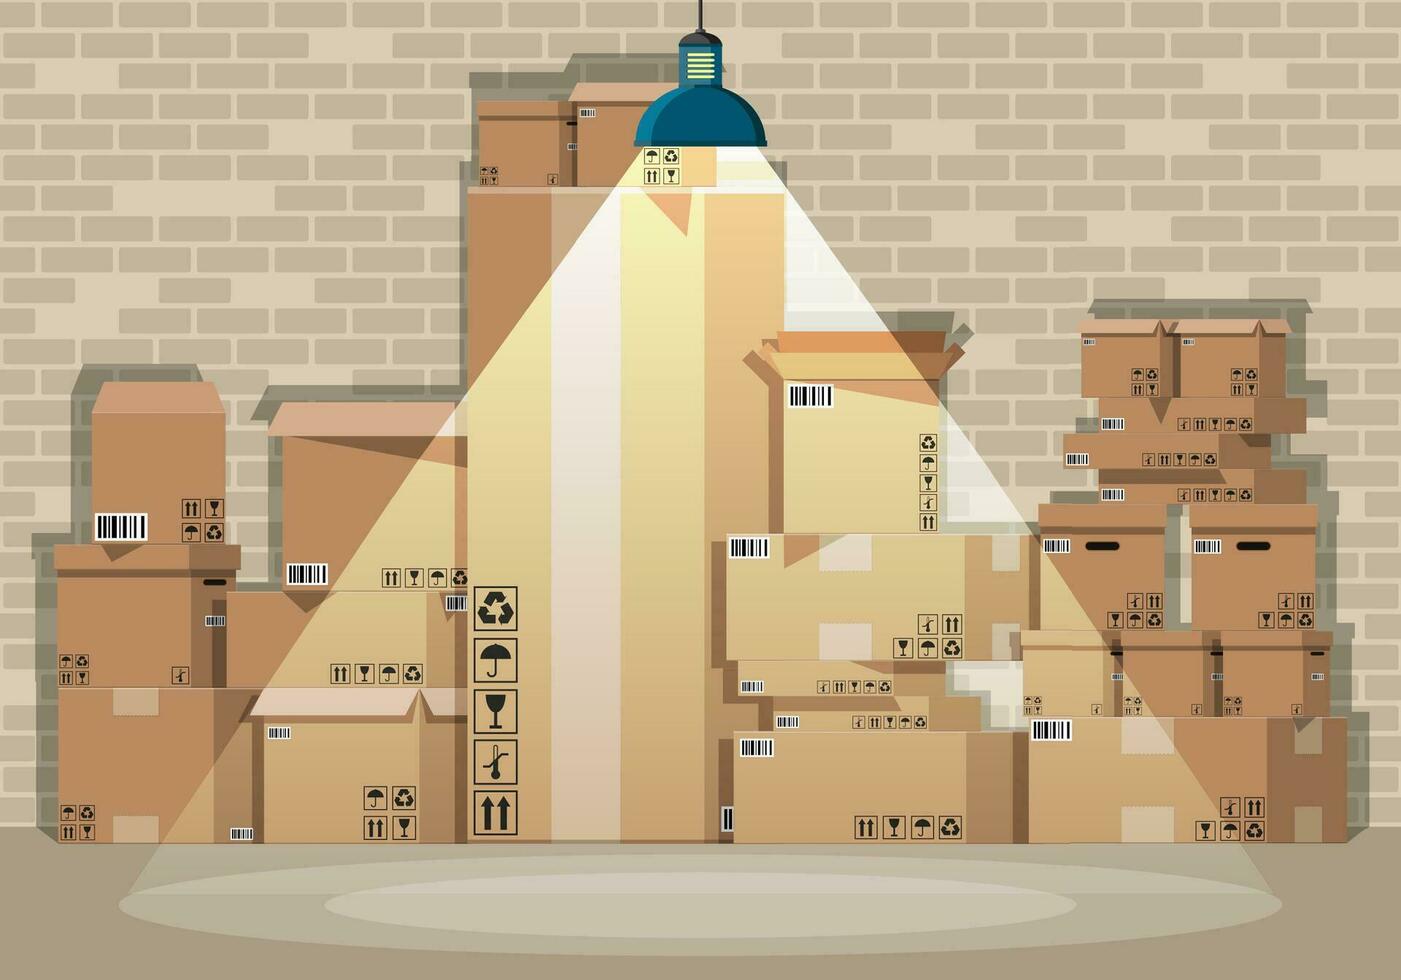 Pile cardboard boxes set in warehouse. Carton delivery packaging open and closed box with fragile signs. Brick wall and lamp. Vector illustration in flat style